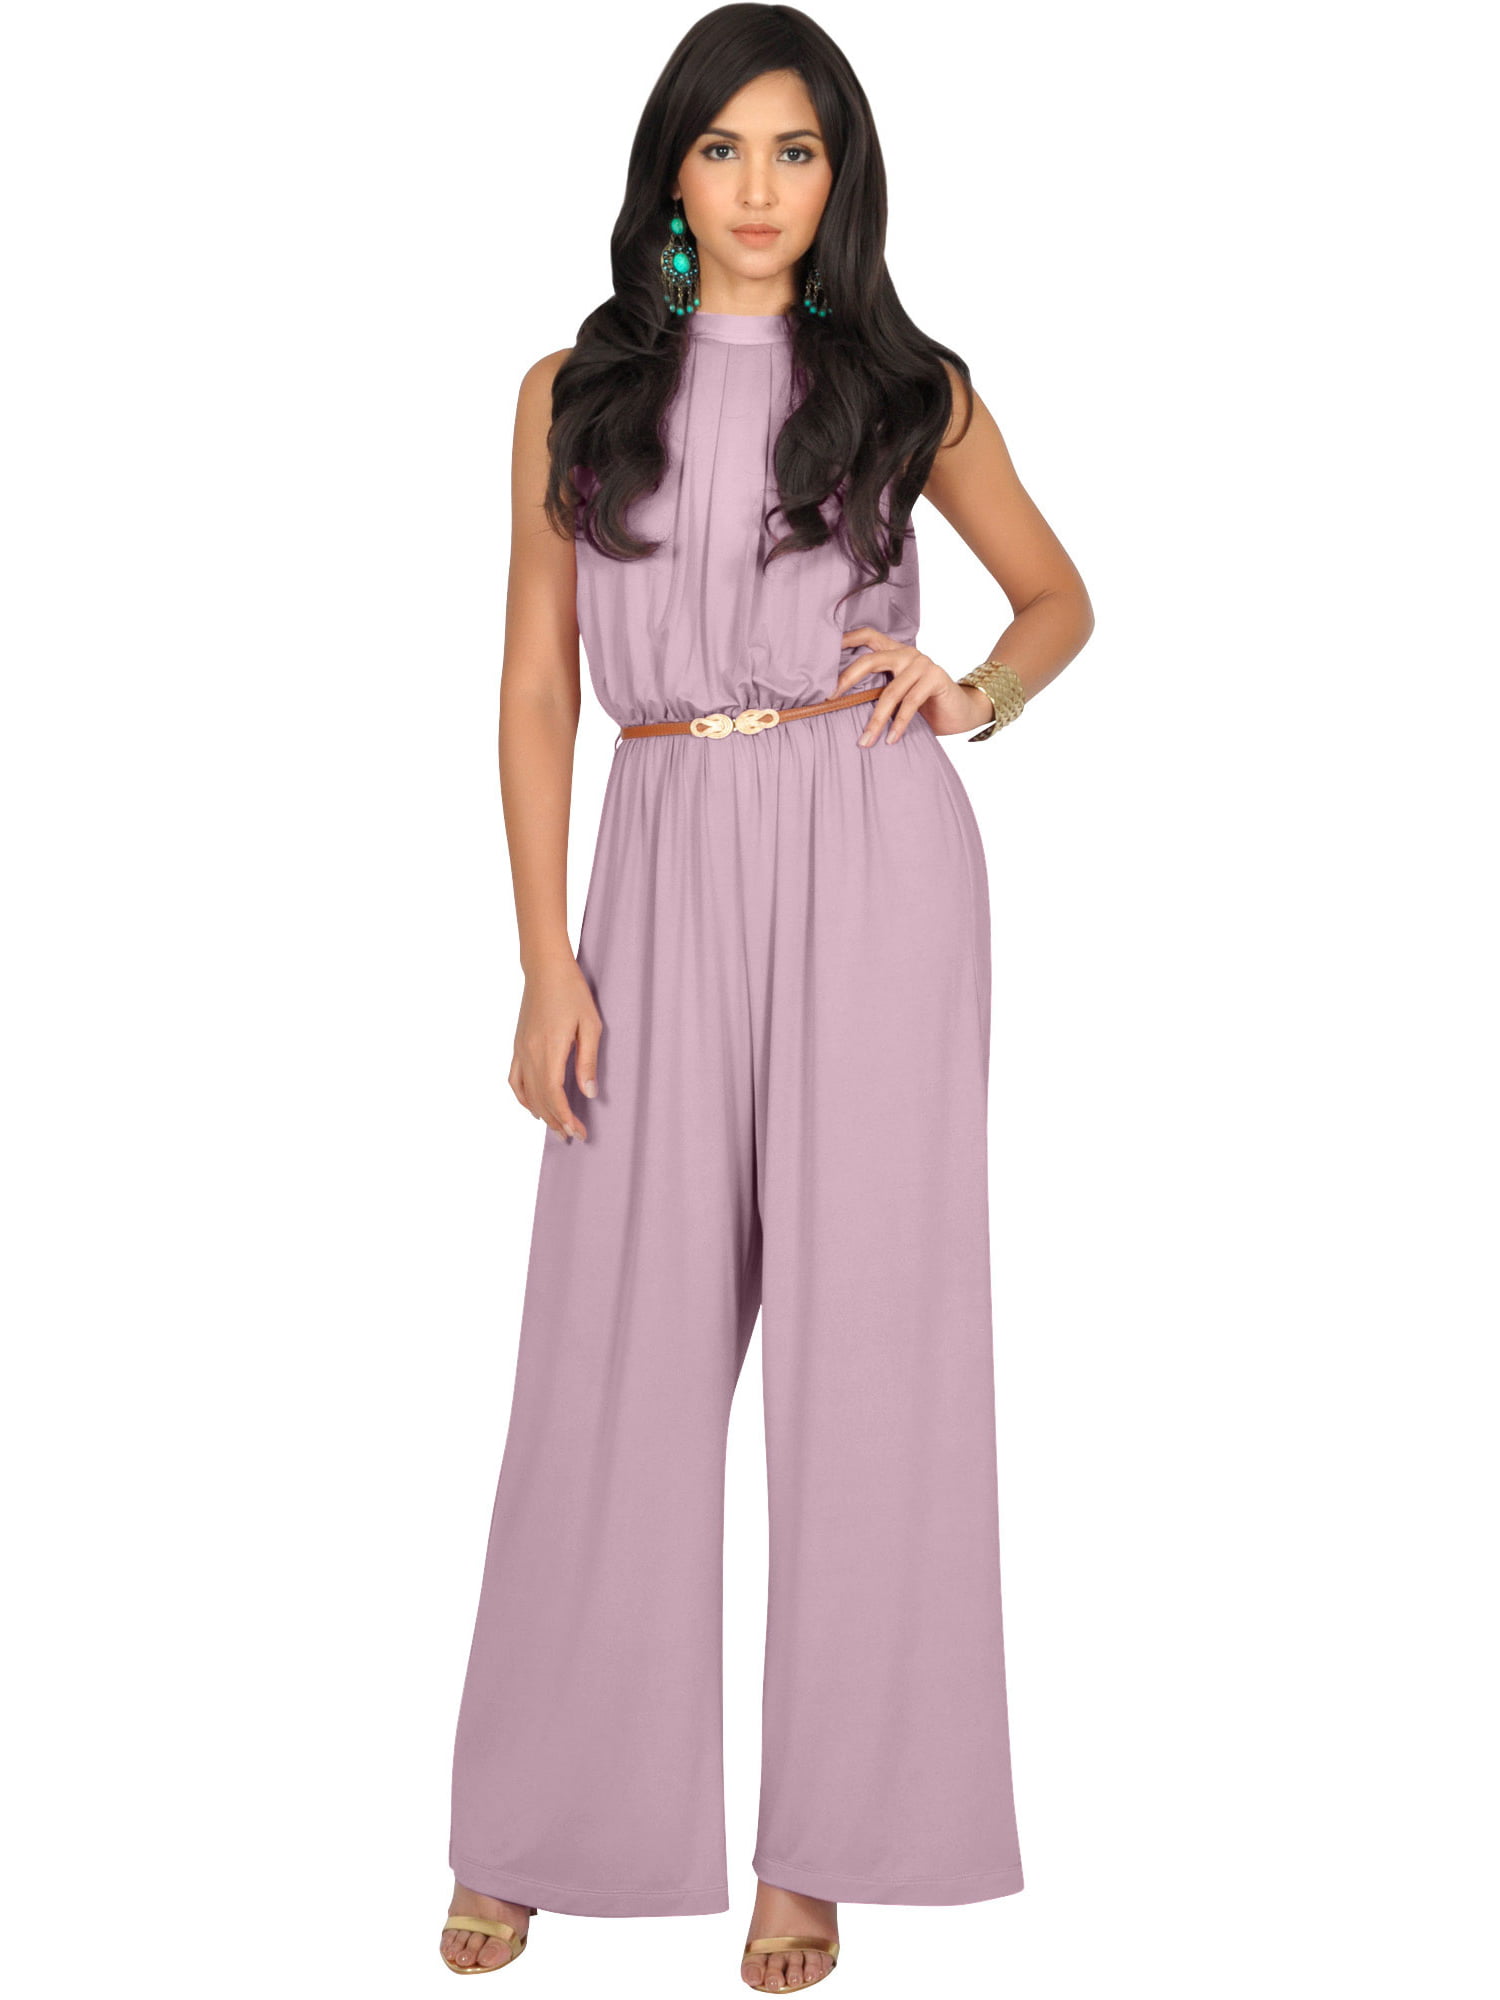 KOH KOH Long Pants Jumpsuit Formal One Piece Cocktail Evening Fall